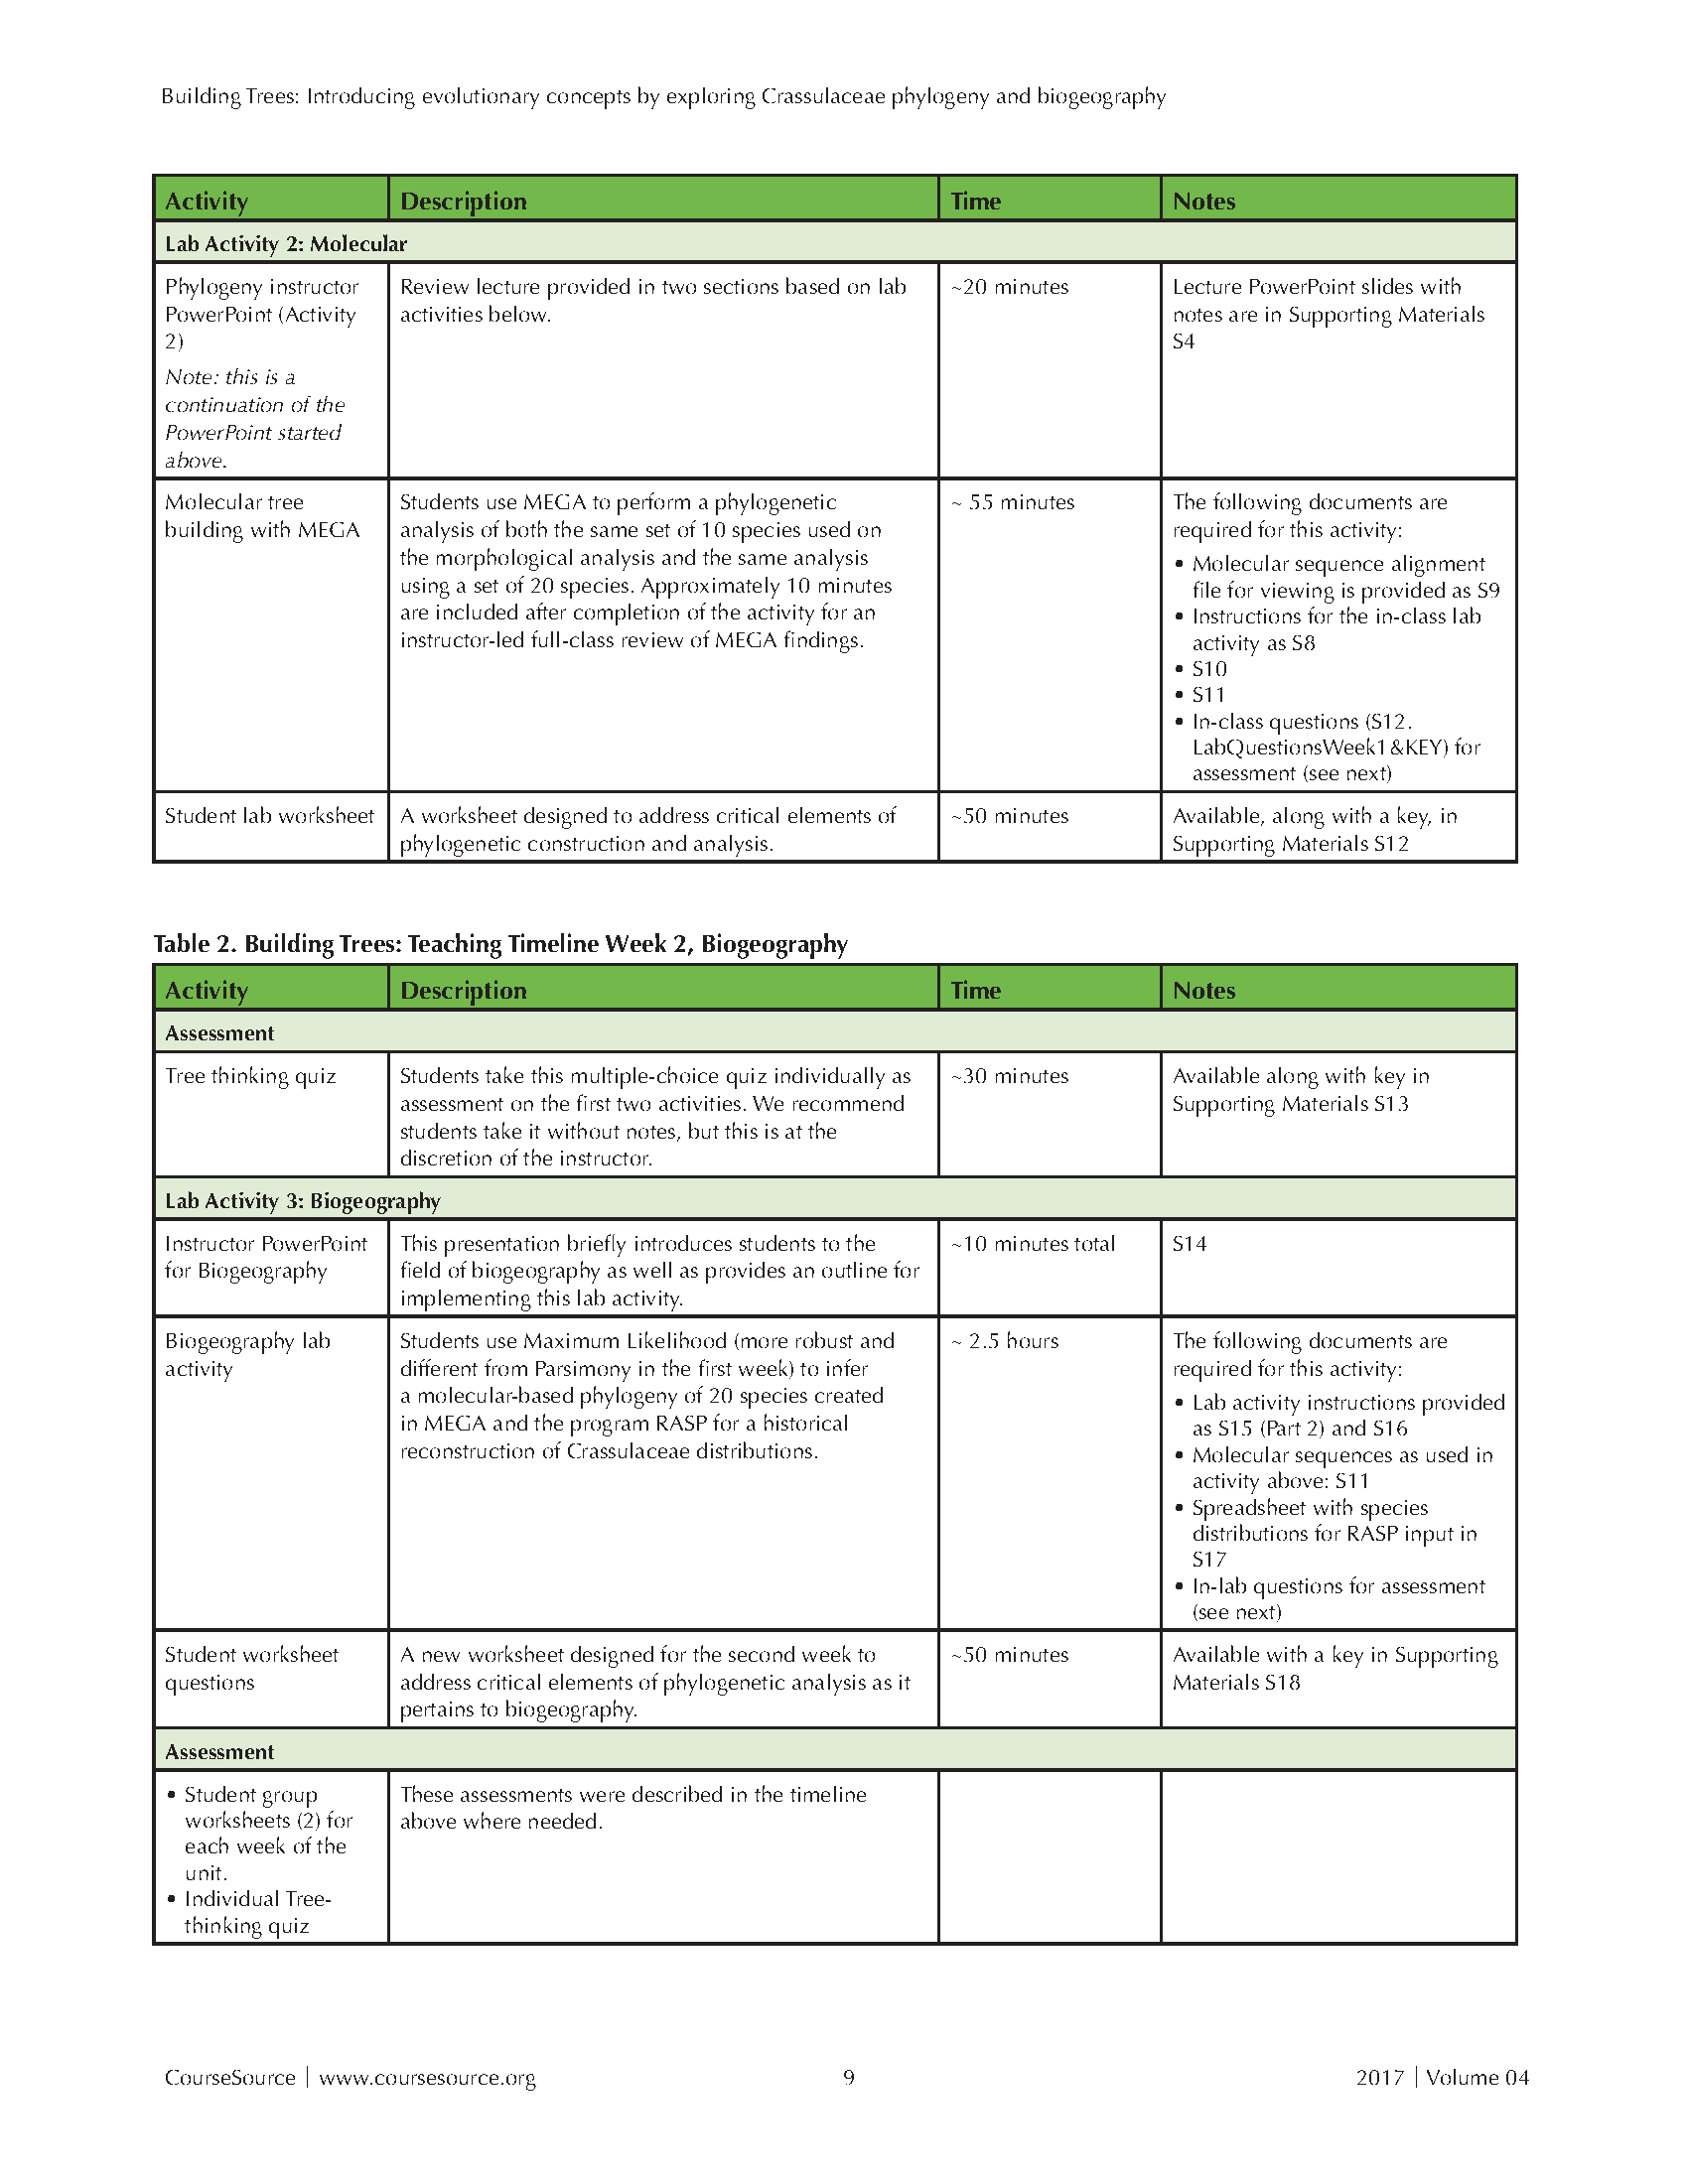 Table 1. Building Trees-Teaching Timeline Page 2